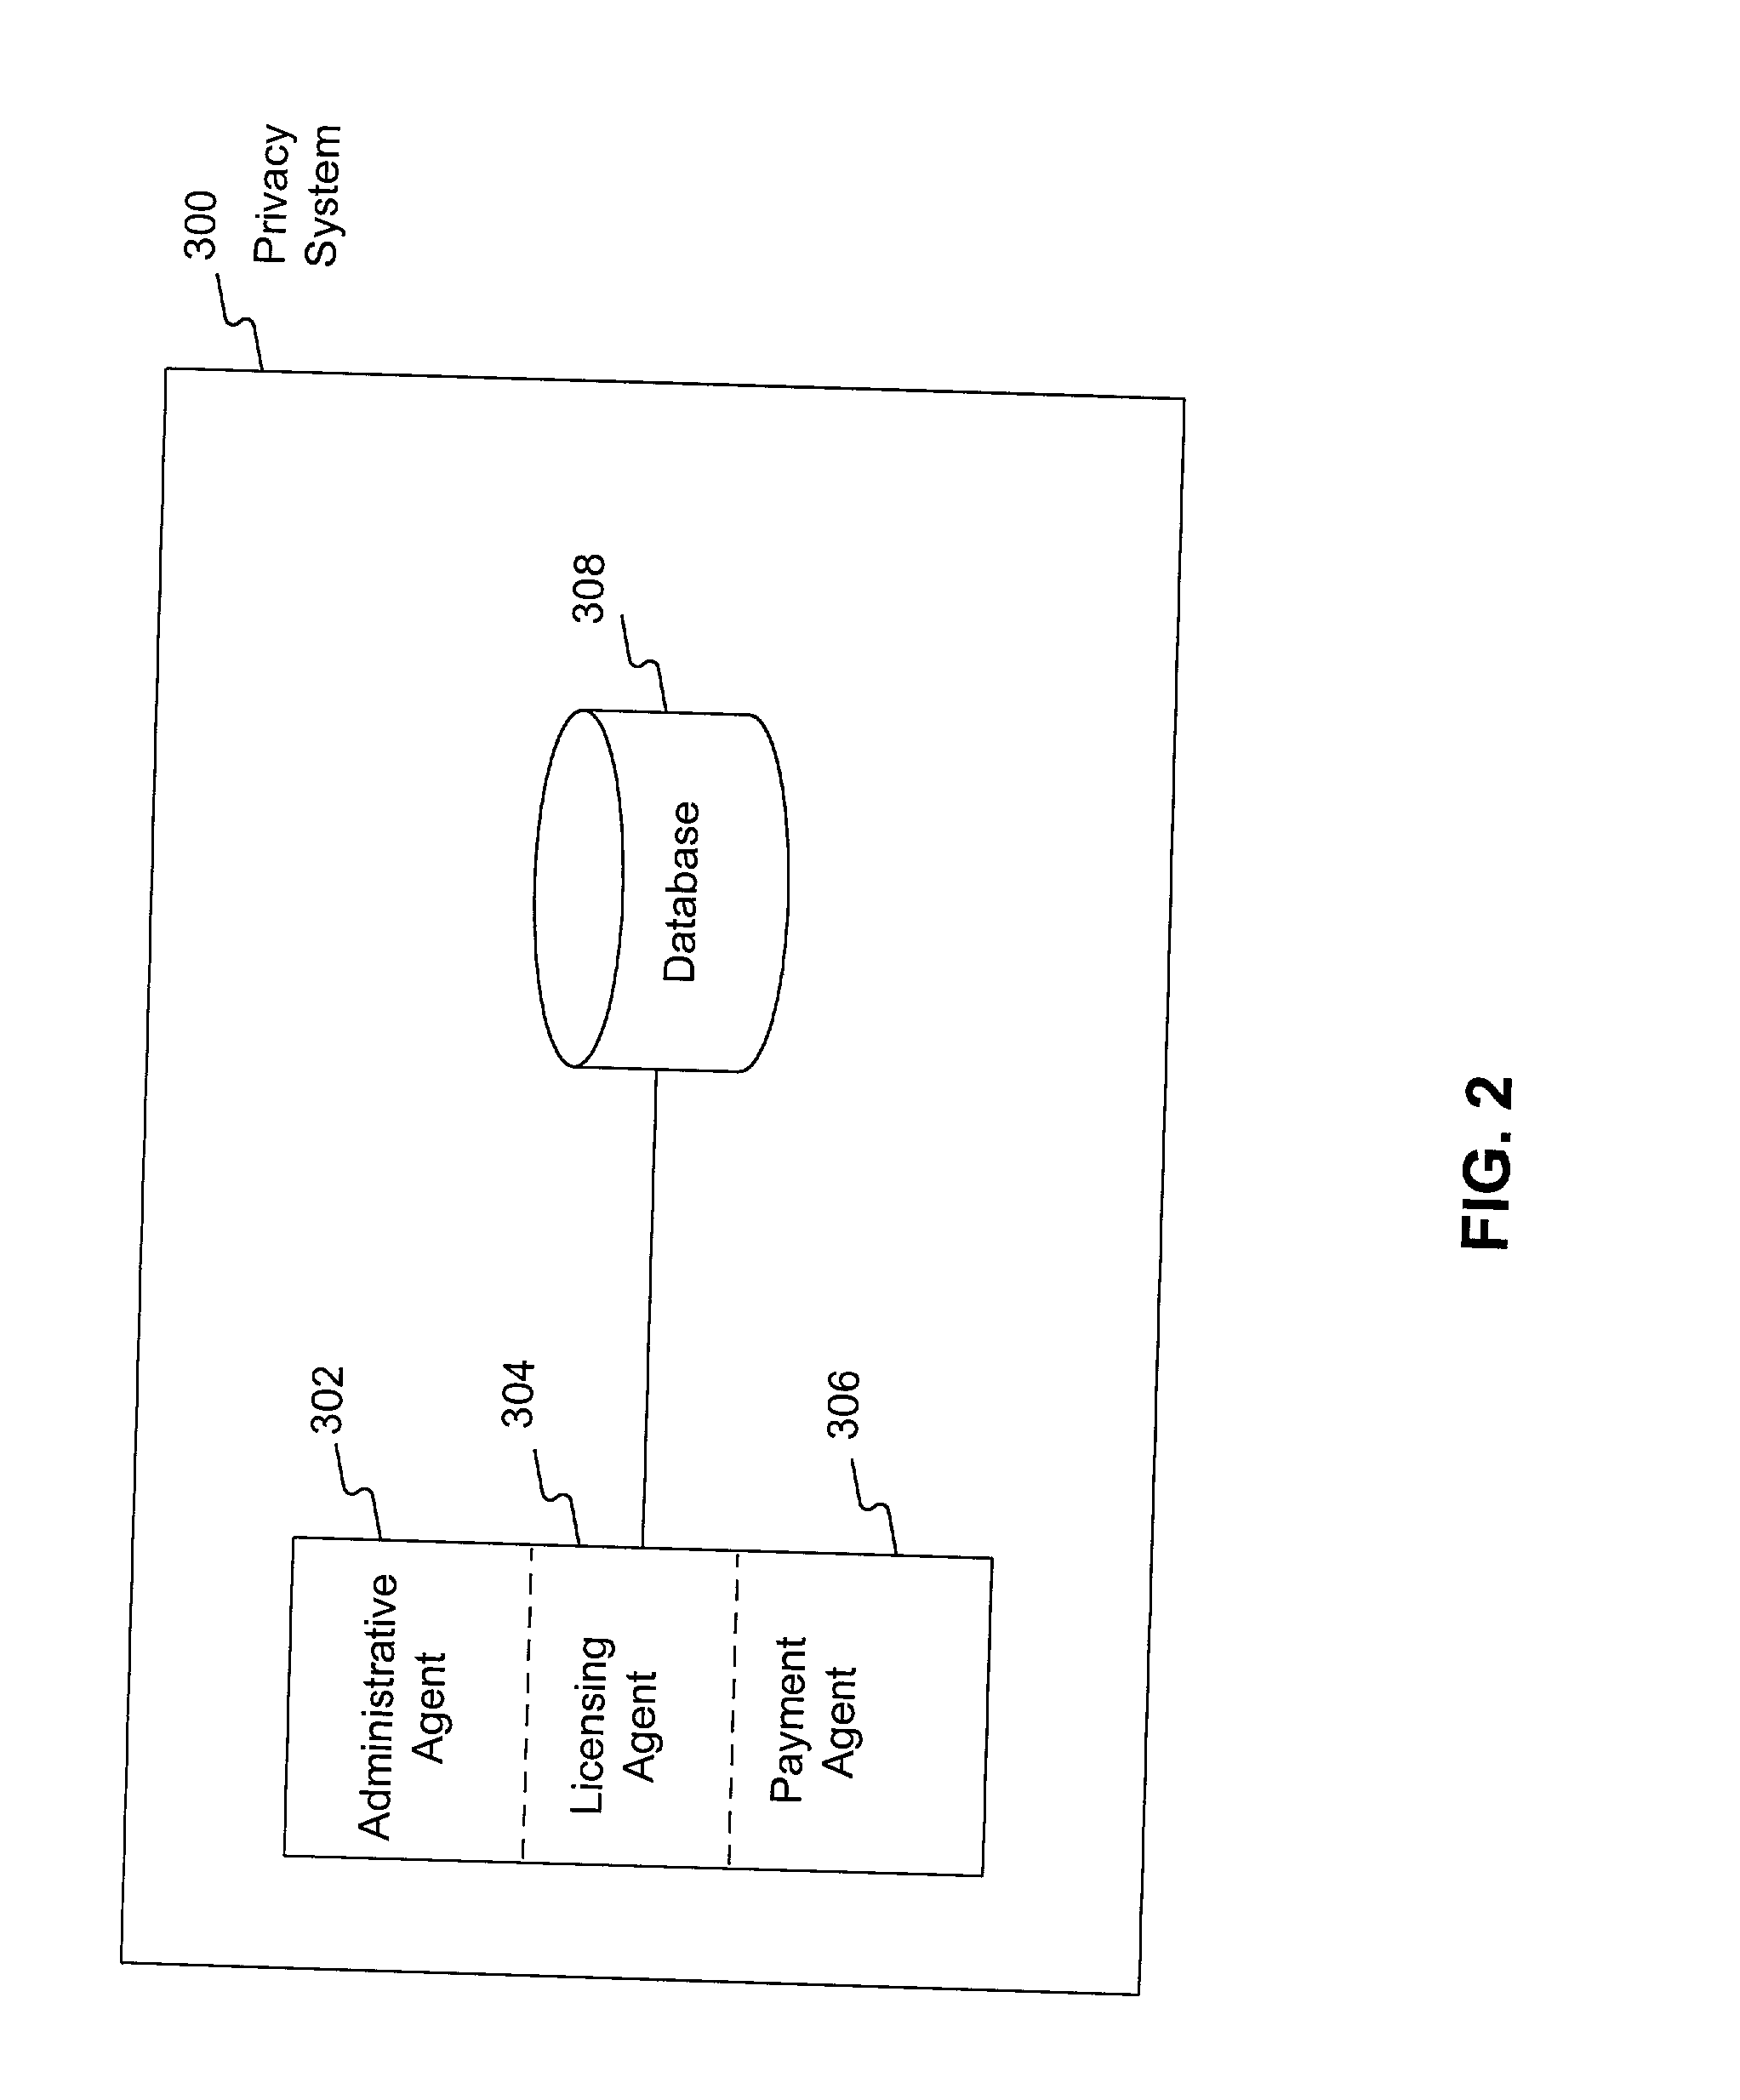 System and method for managing consumer information